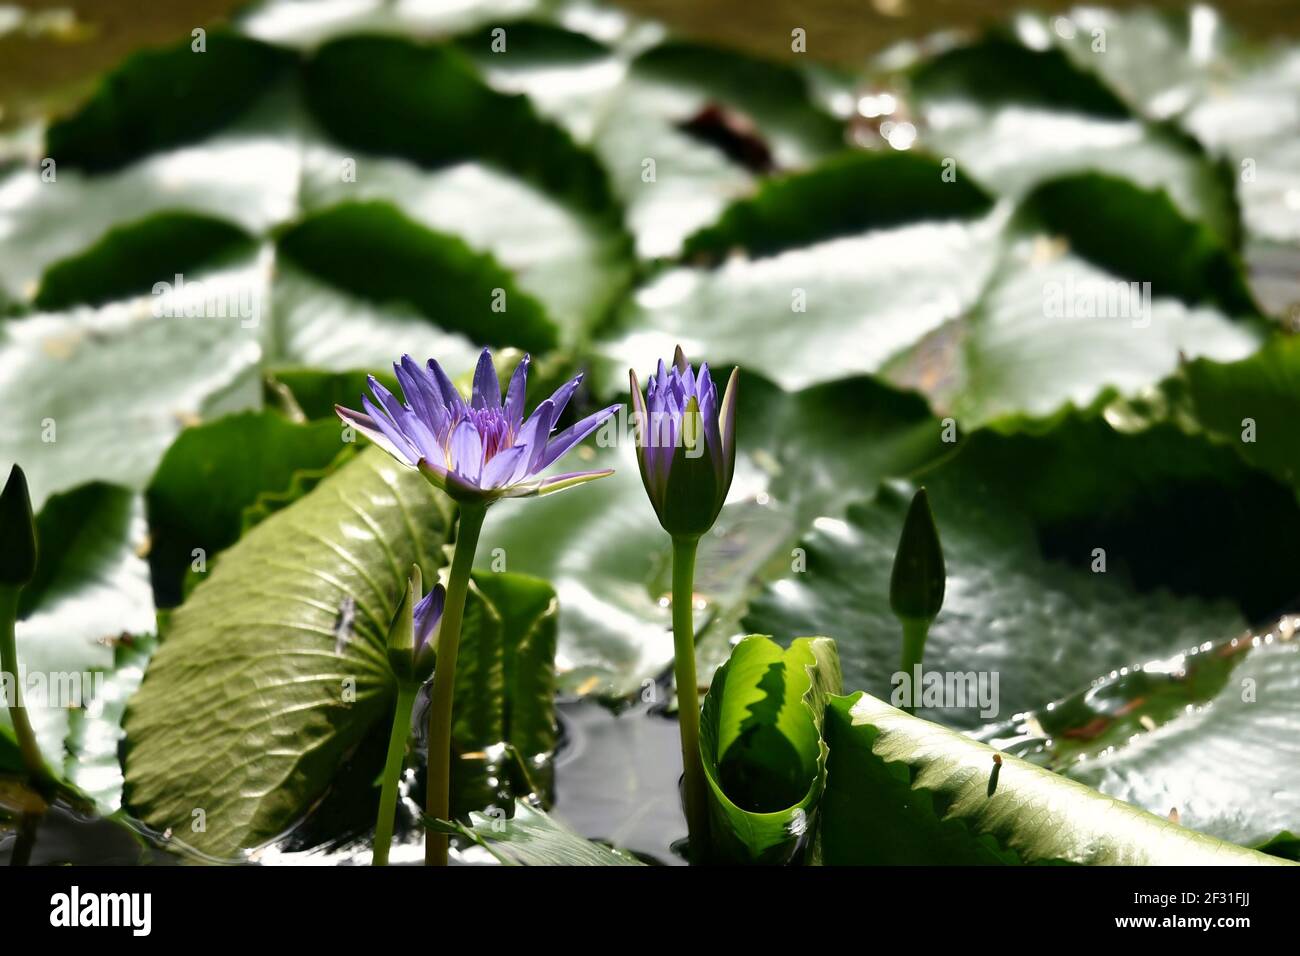 Nymphaea nouchali, a waterlily with royal blue flower petals on floating waxy leaves Stock Photo